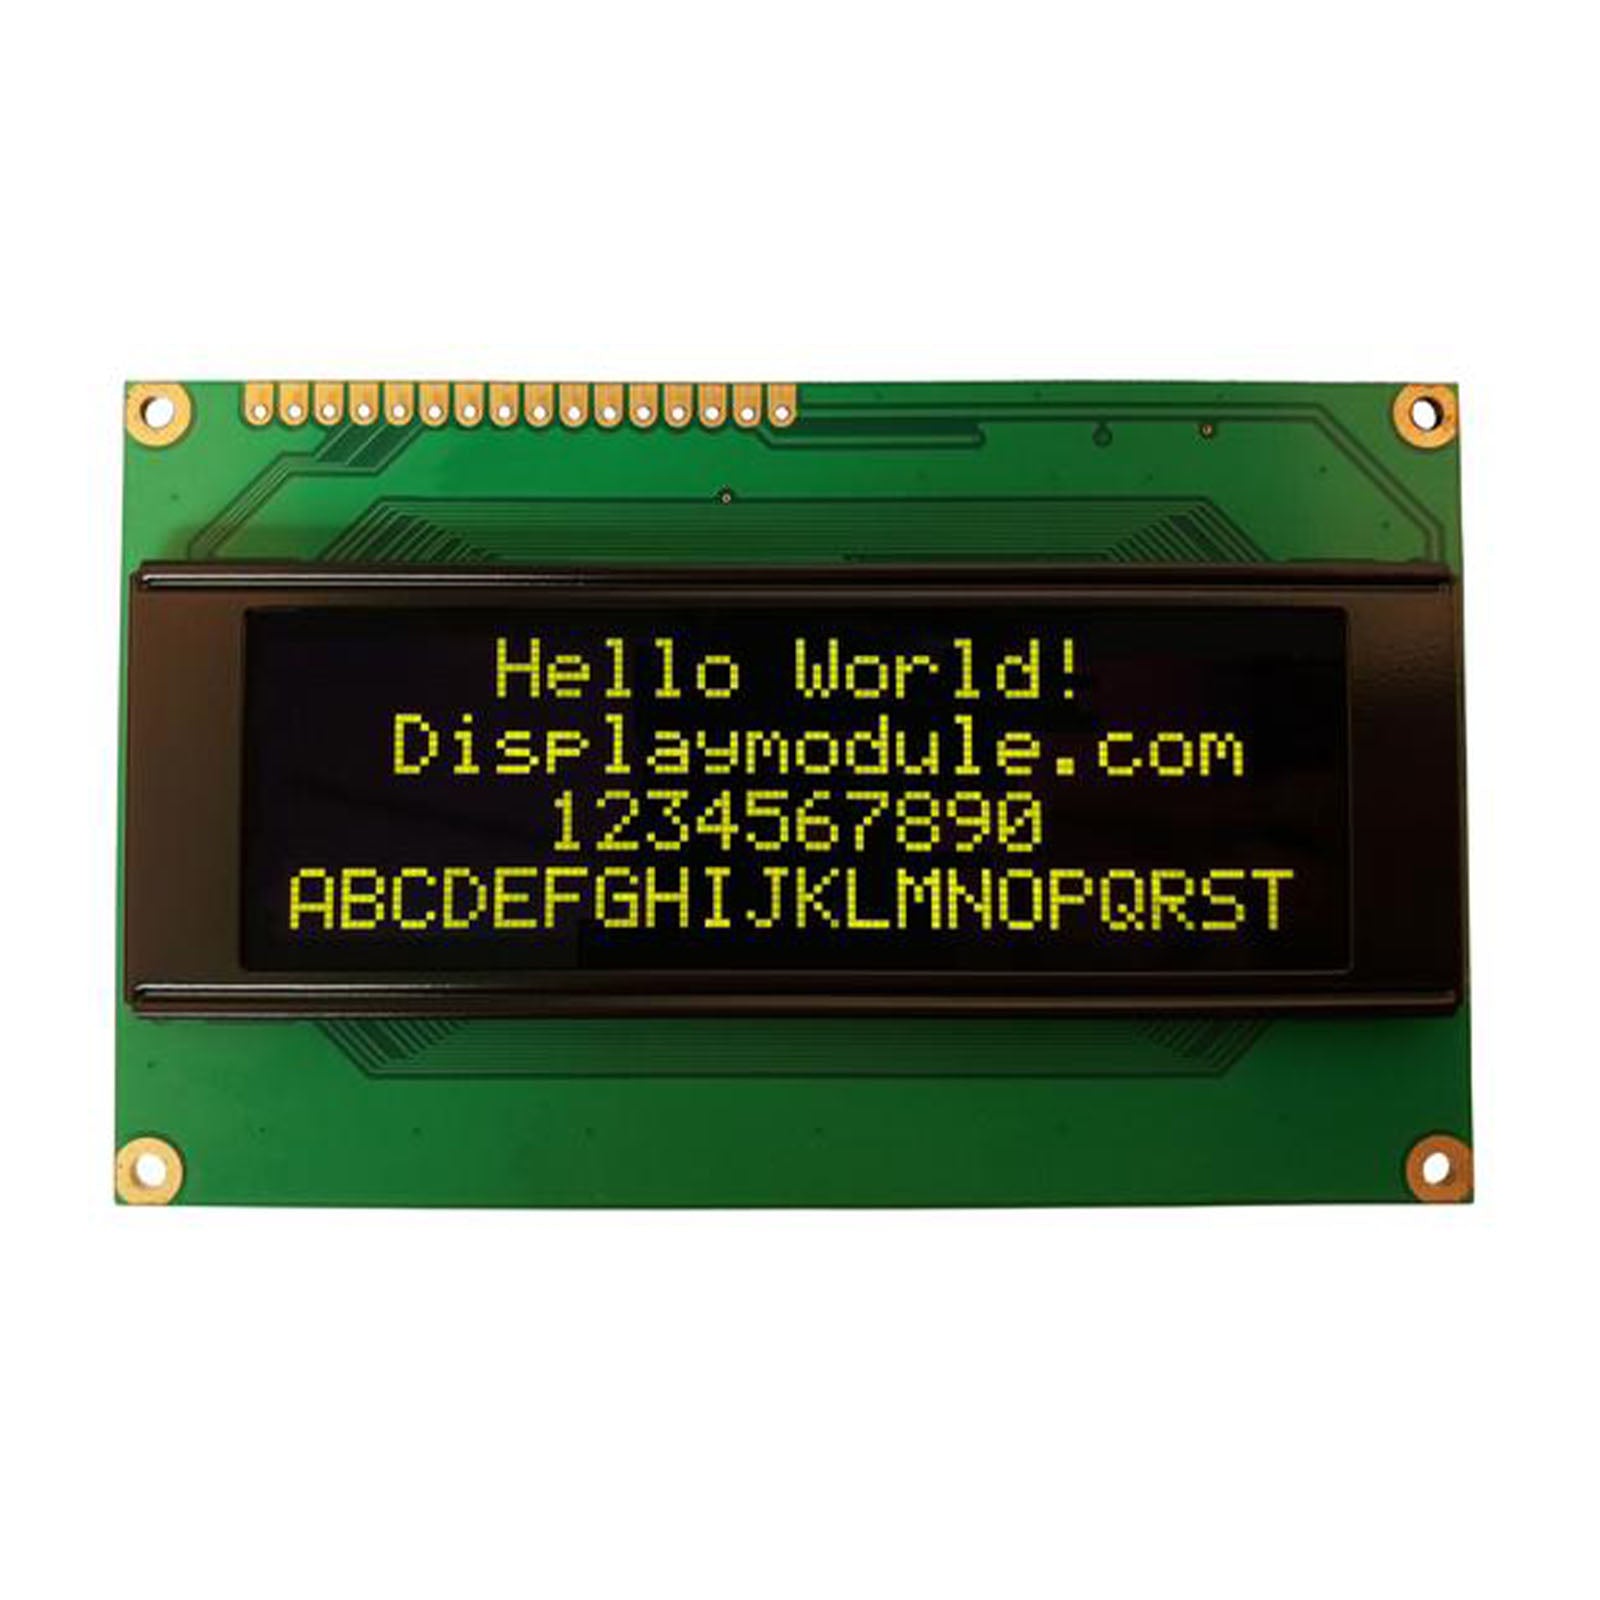 Yellow 20x4 Character Monochrome OLED display module with MCU, SPI, and I2C interfaces